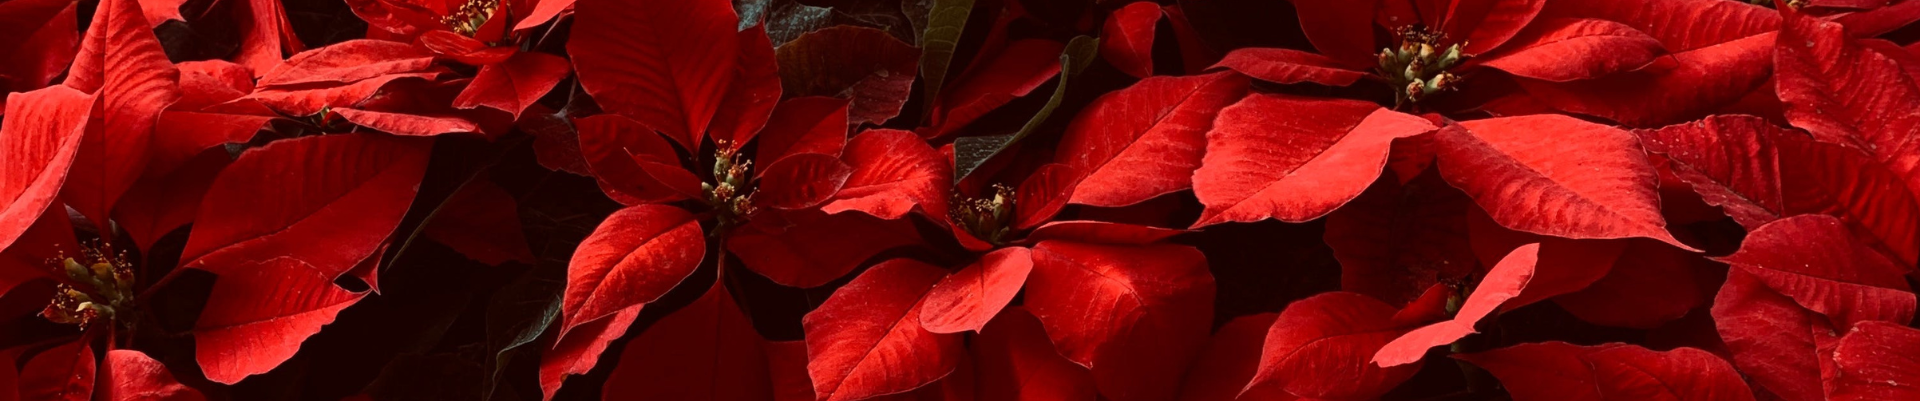 Deck the Halls with Greenery: A Holly Jolly Guide to Holiday Plant Care